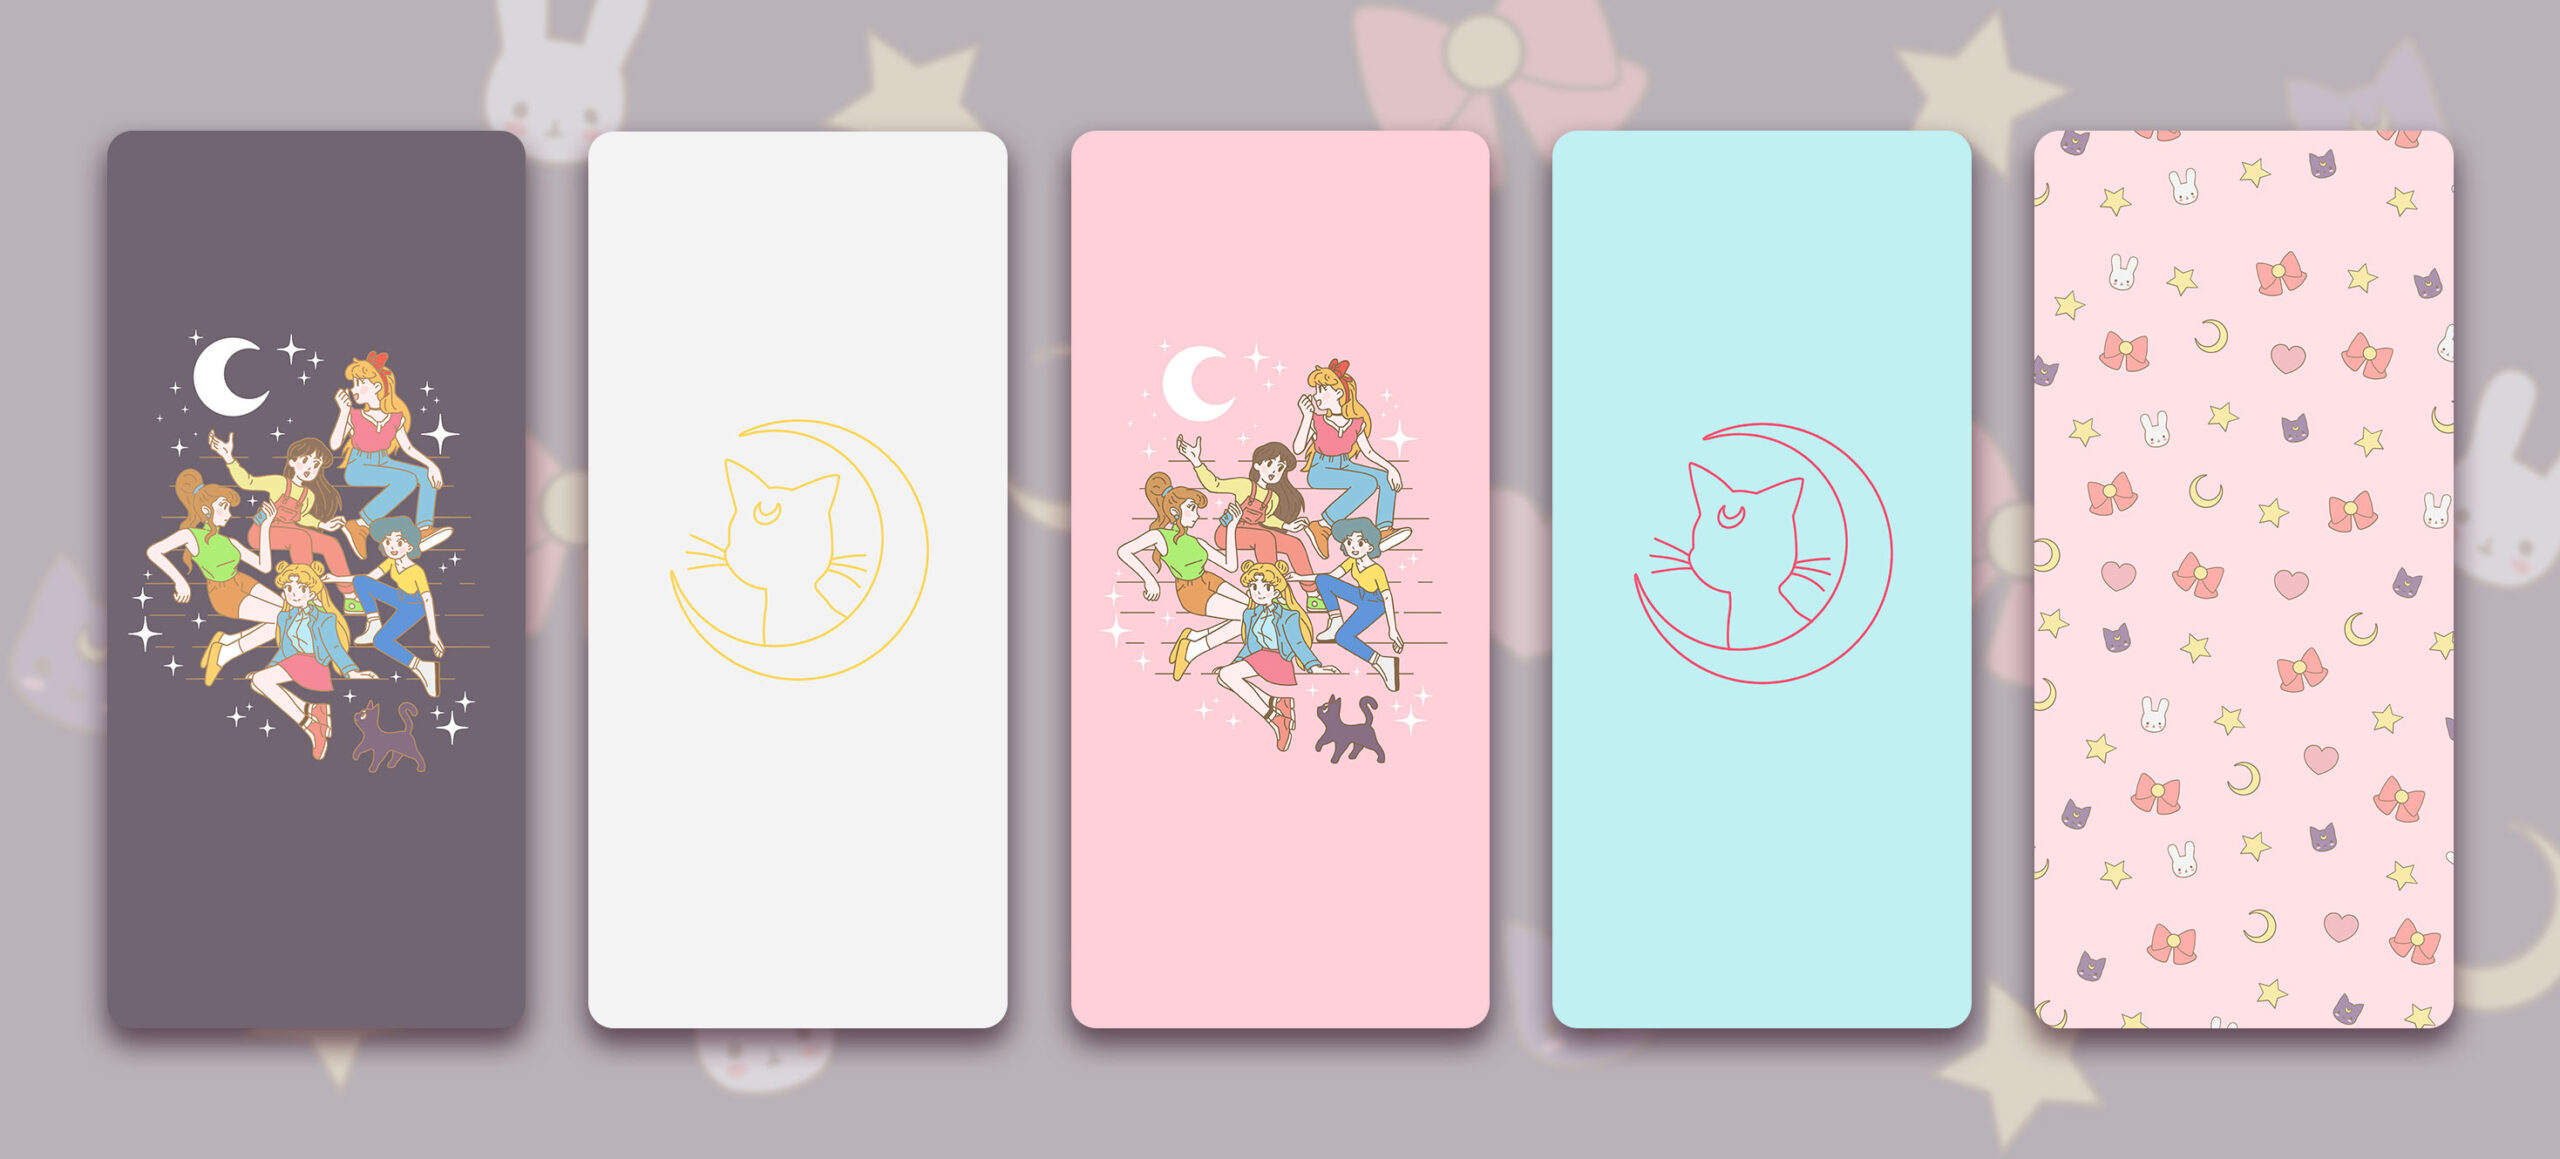 sailor moon wallpapers pack preview 6